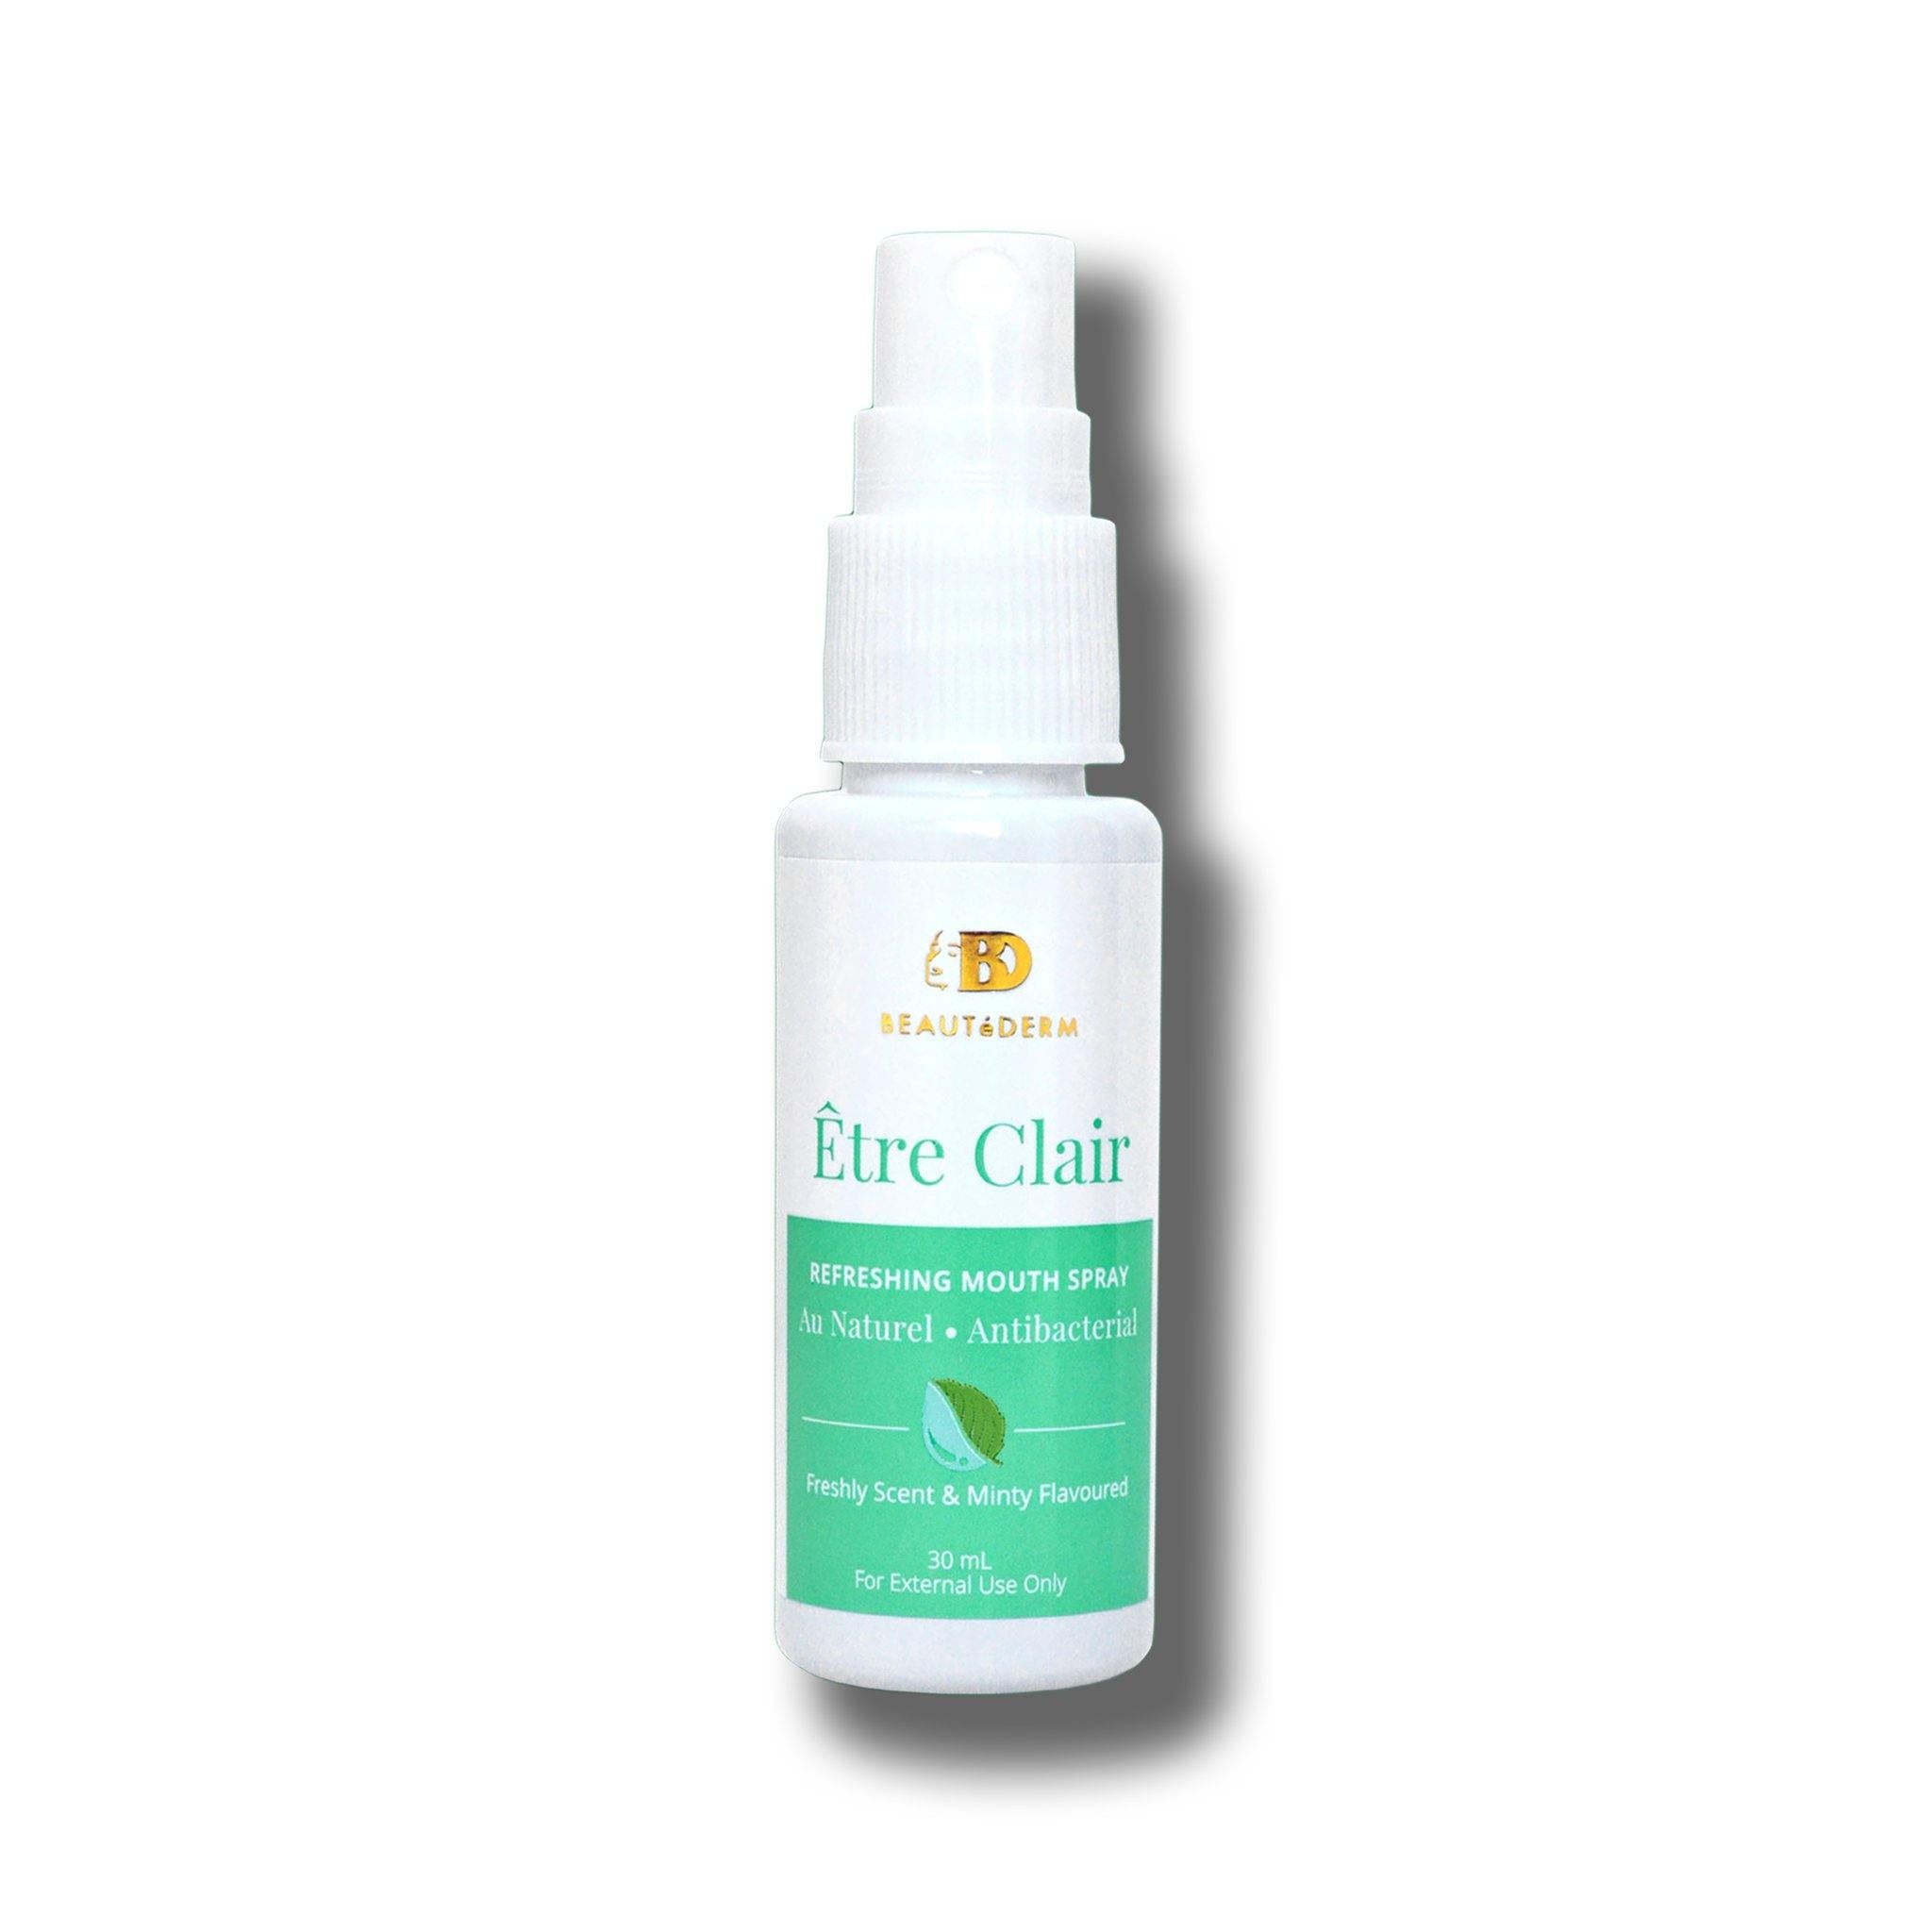 Etre Clair Refreshing Mouth Spray, 30ml, by Beautederm